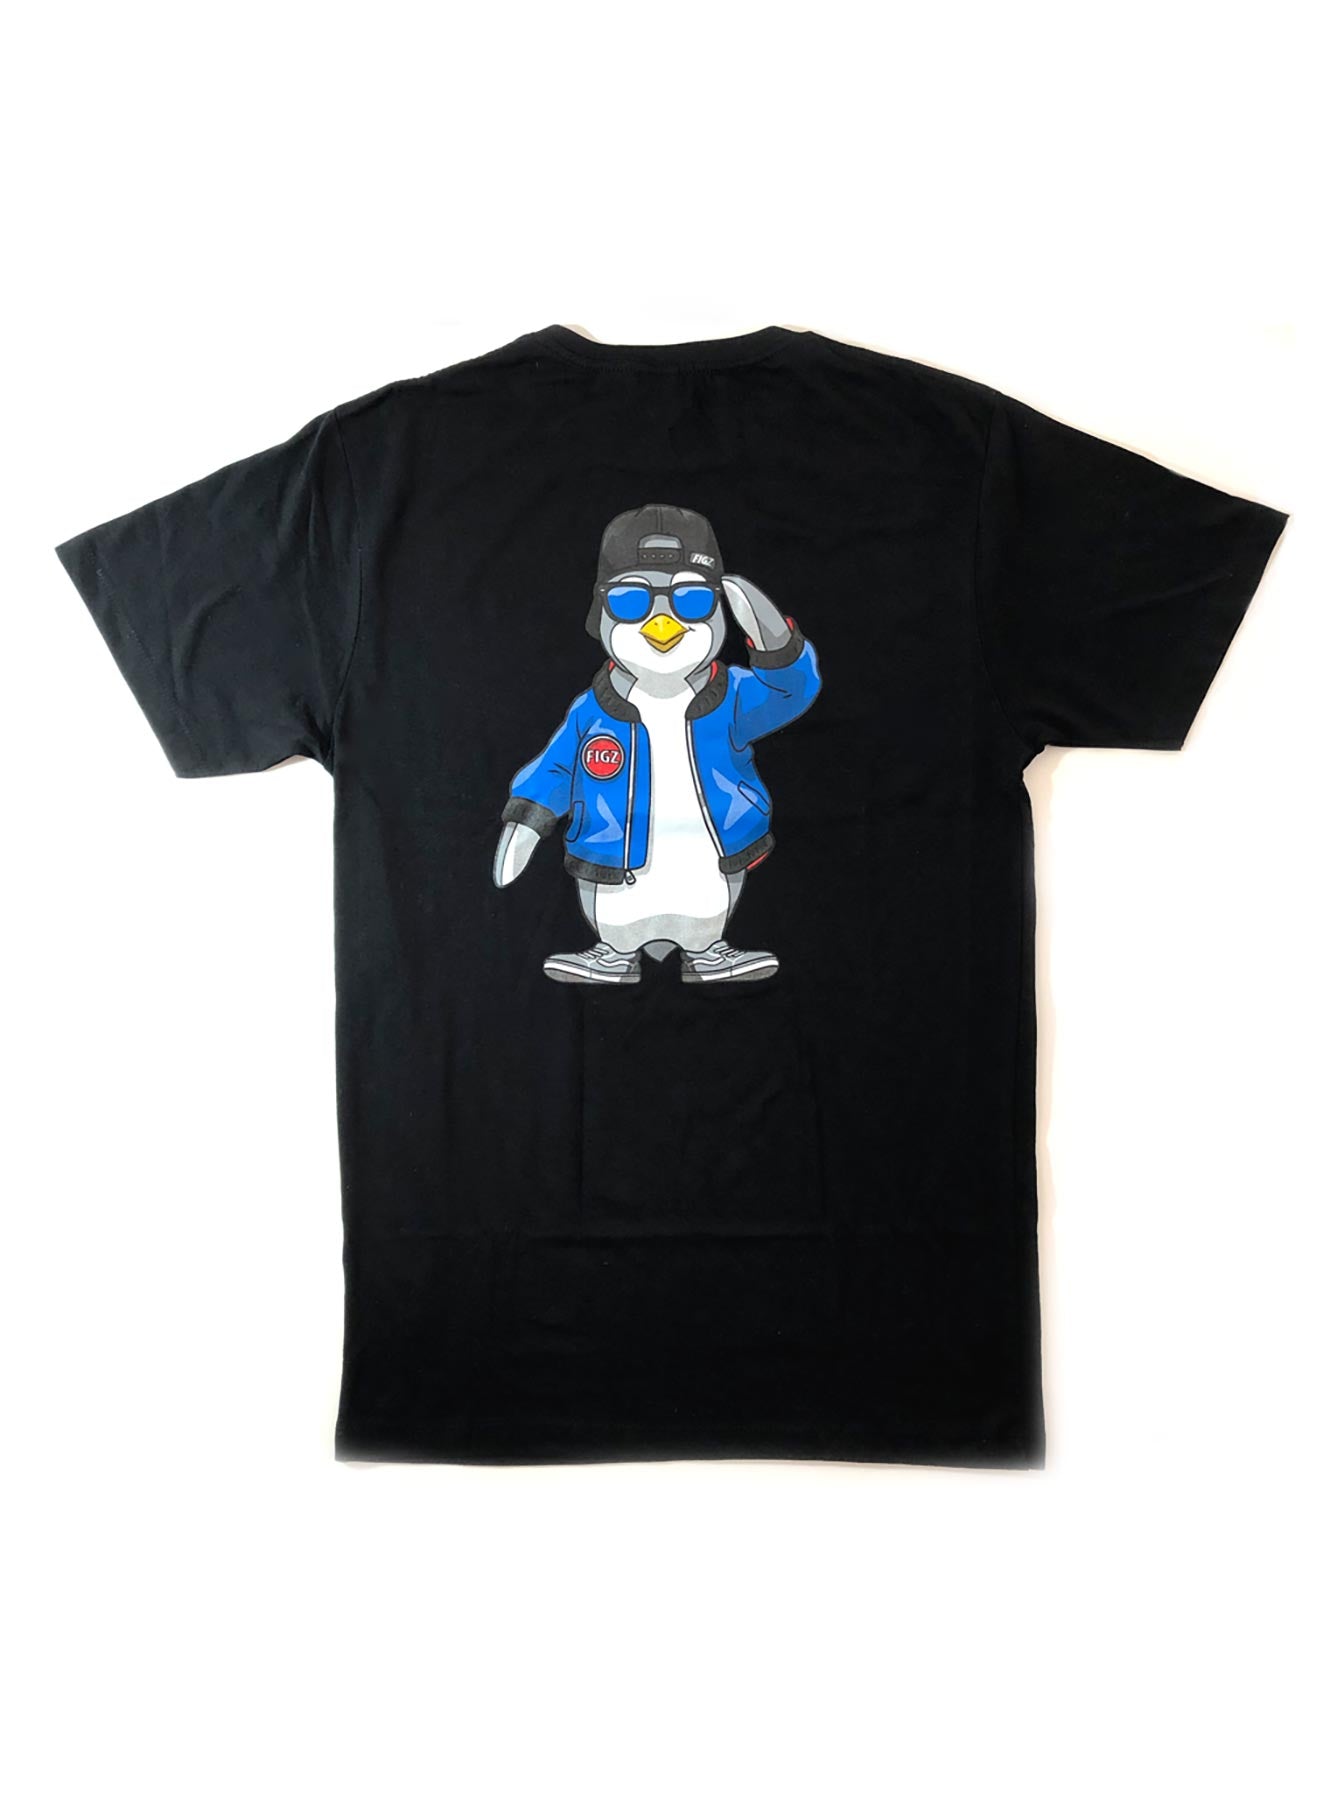 Figz Penguin | T-Shirt (Youth + Adult)